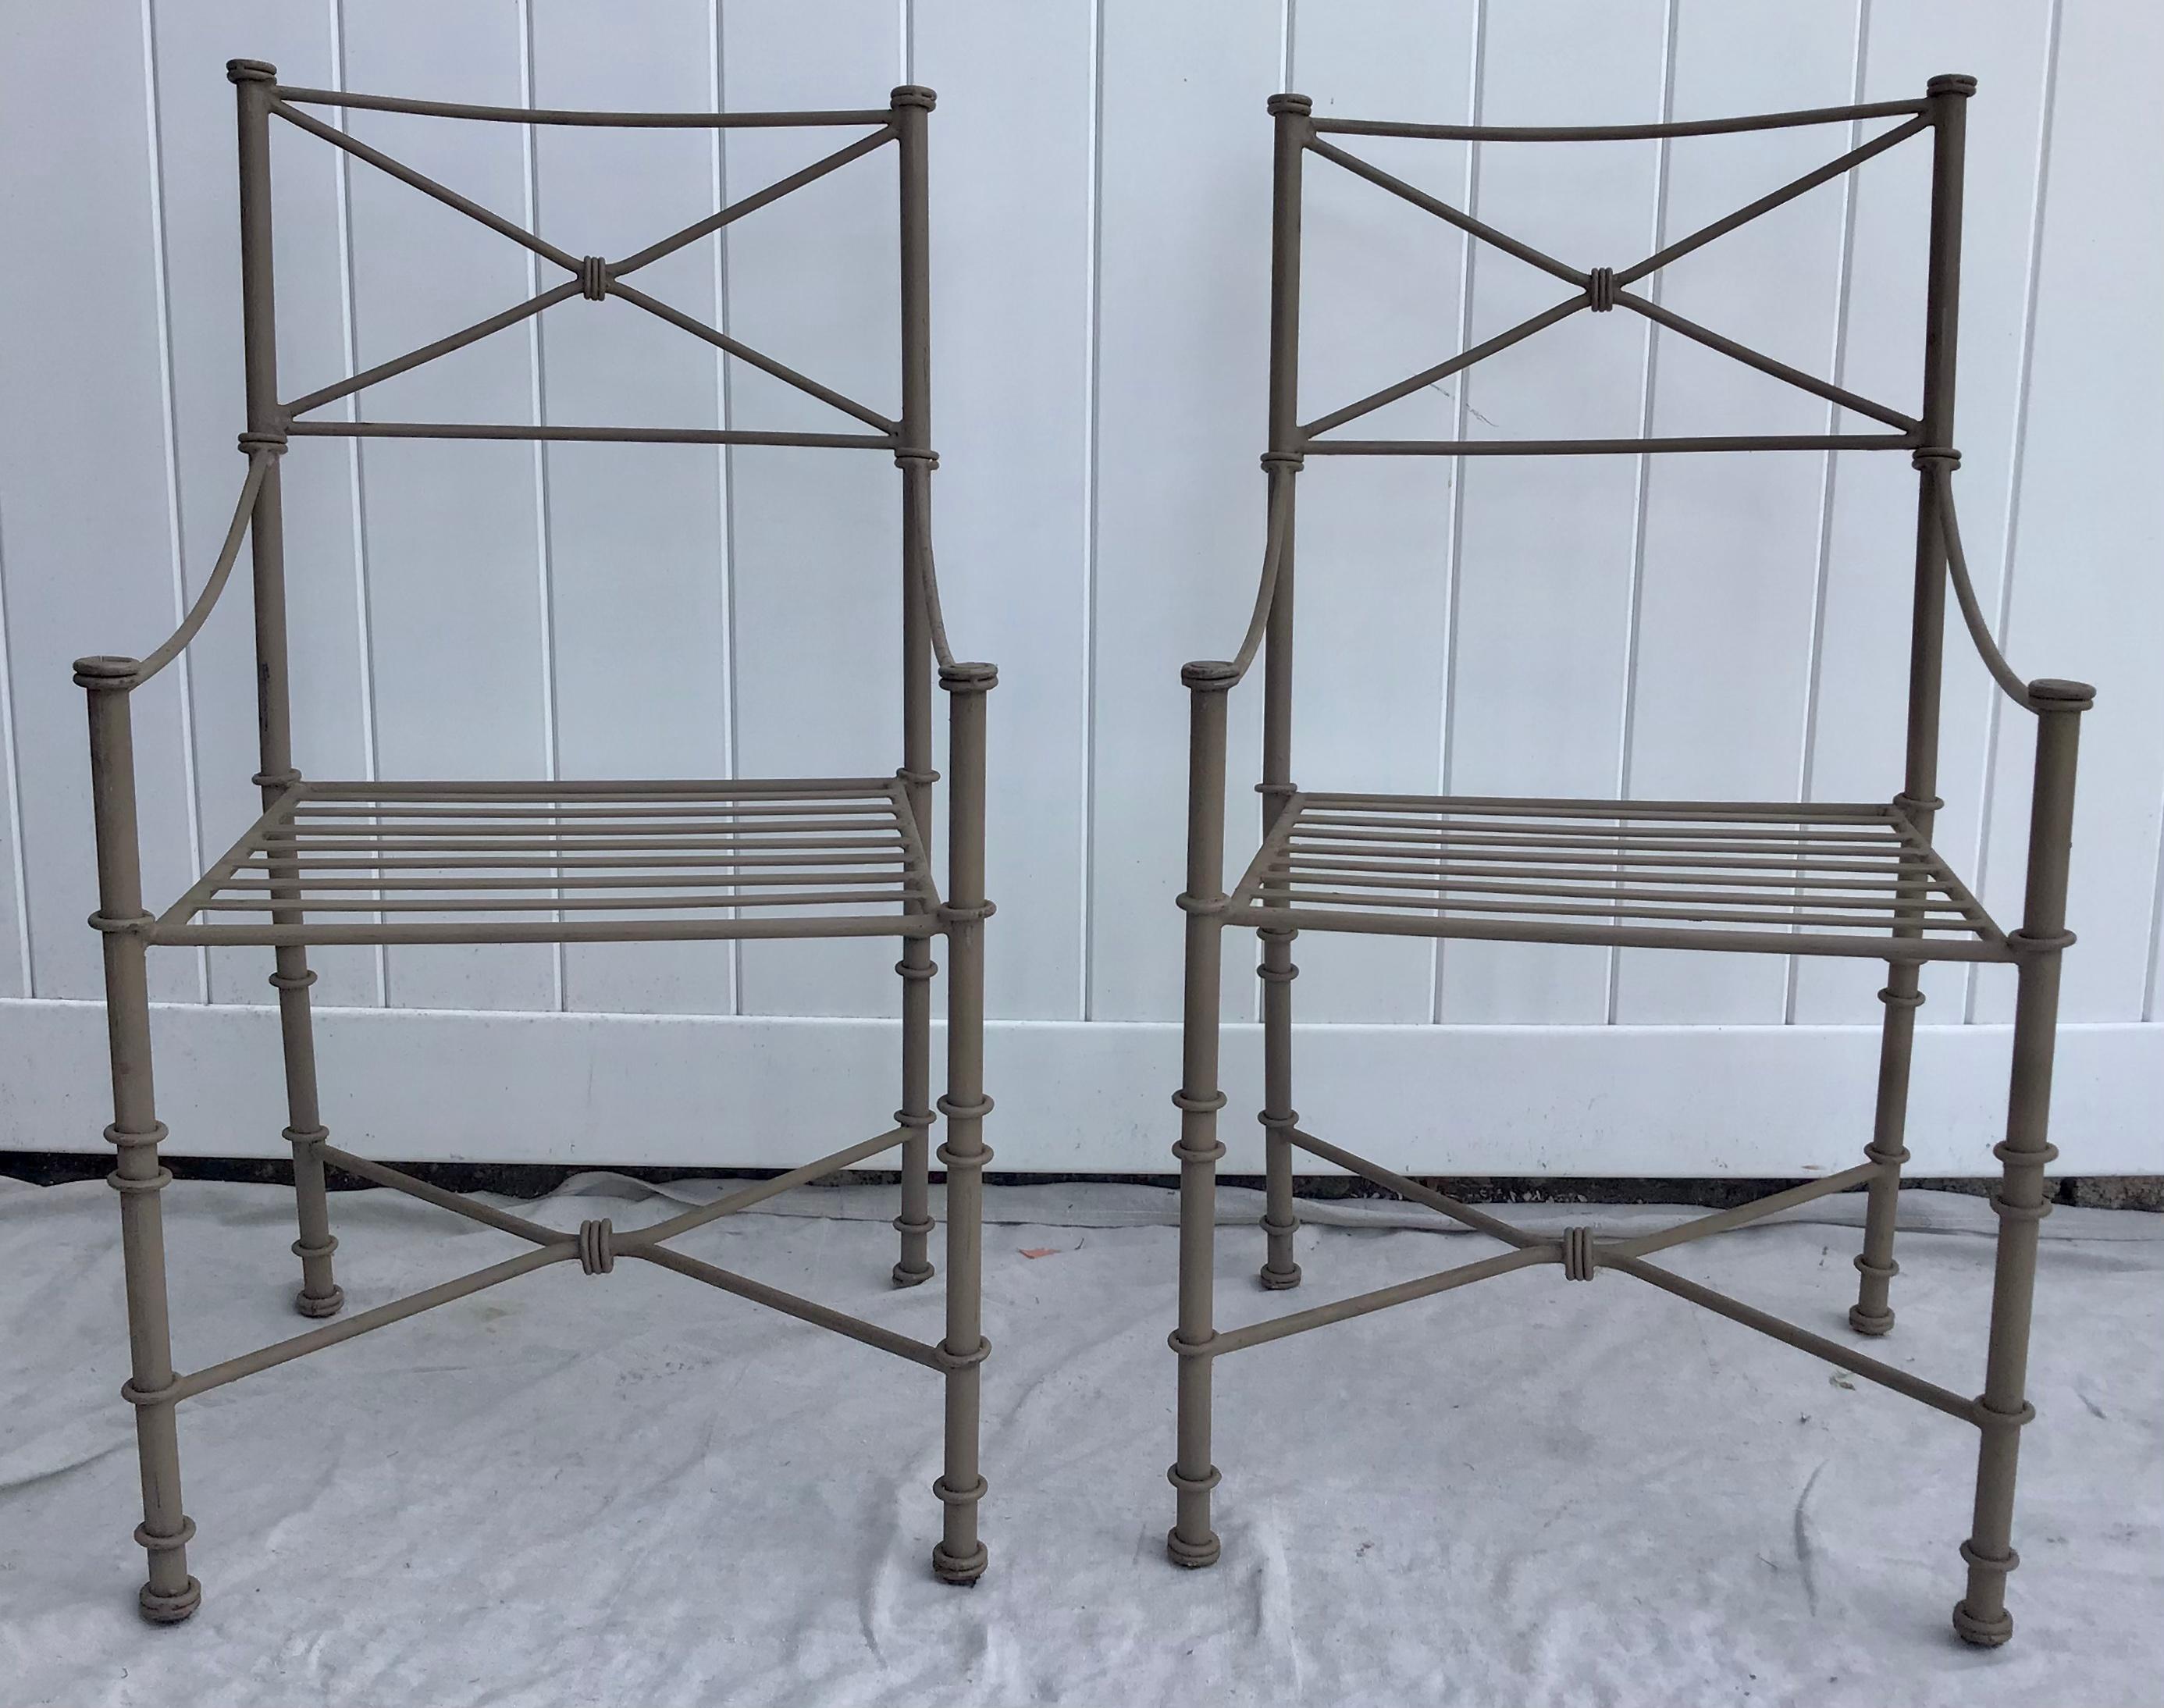 Gorgeous set of four heavy iron garden chairs, coated with an exquisite verdigris patina style finish. In its former life, this set was only used indoors, and is in near perfect condition. Equally at home in a garden, on a patio or in a living room,